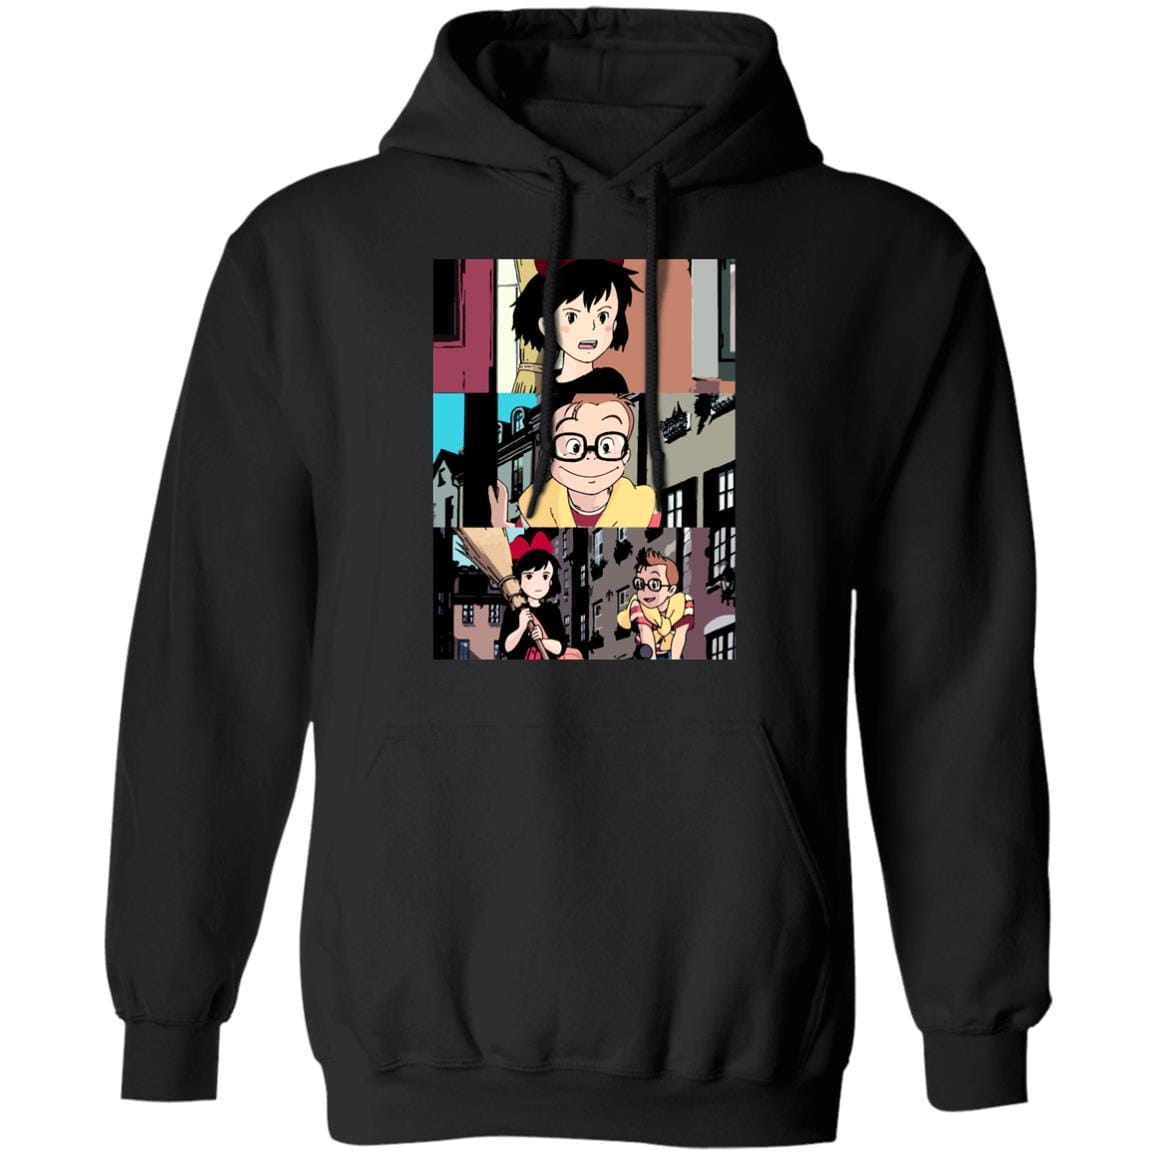 Kiki’s Delivery Service Tower Collage Hoodie Unisex